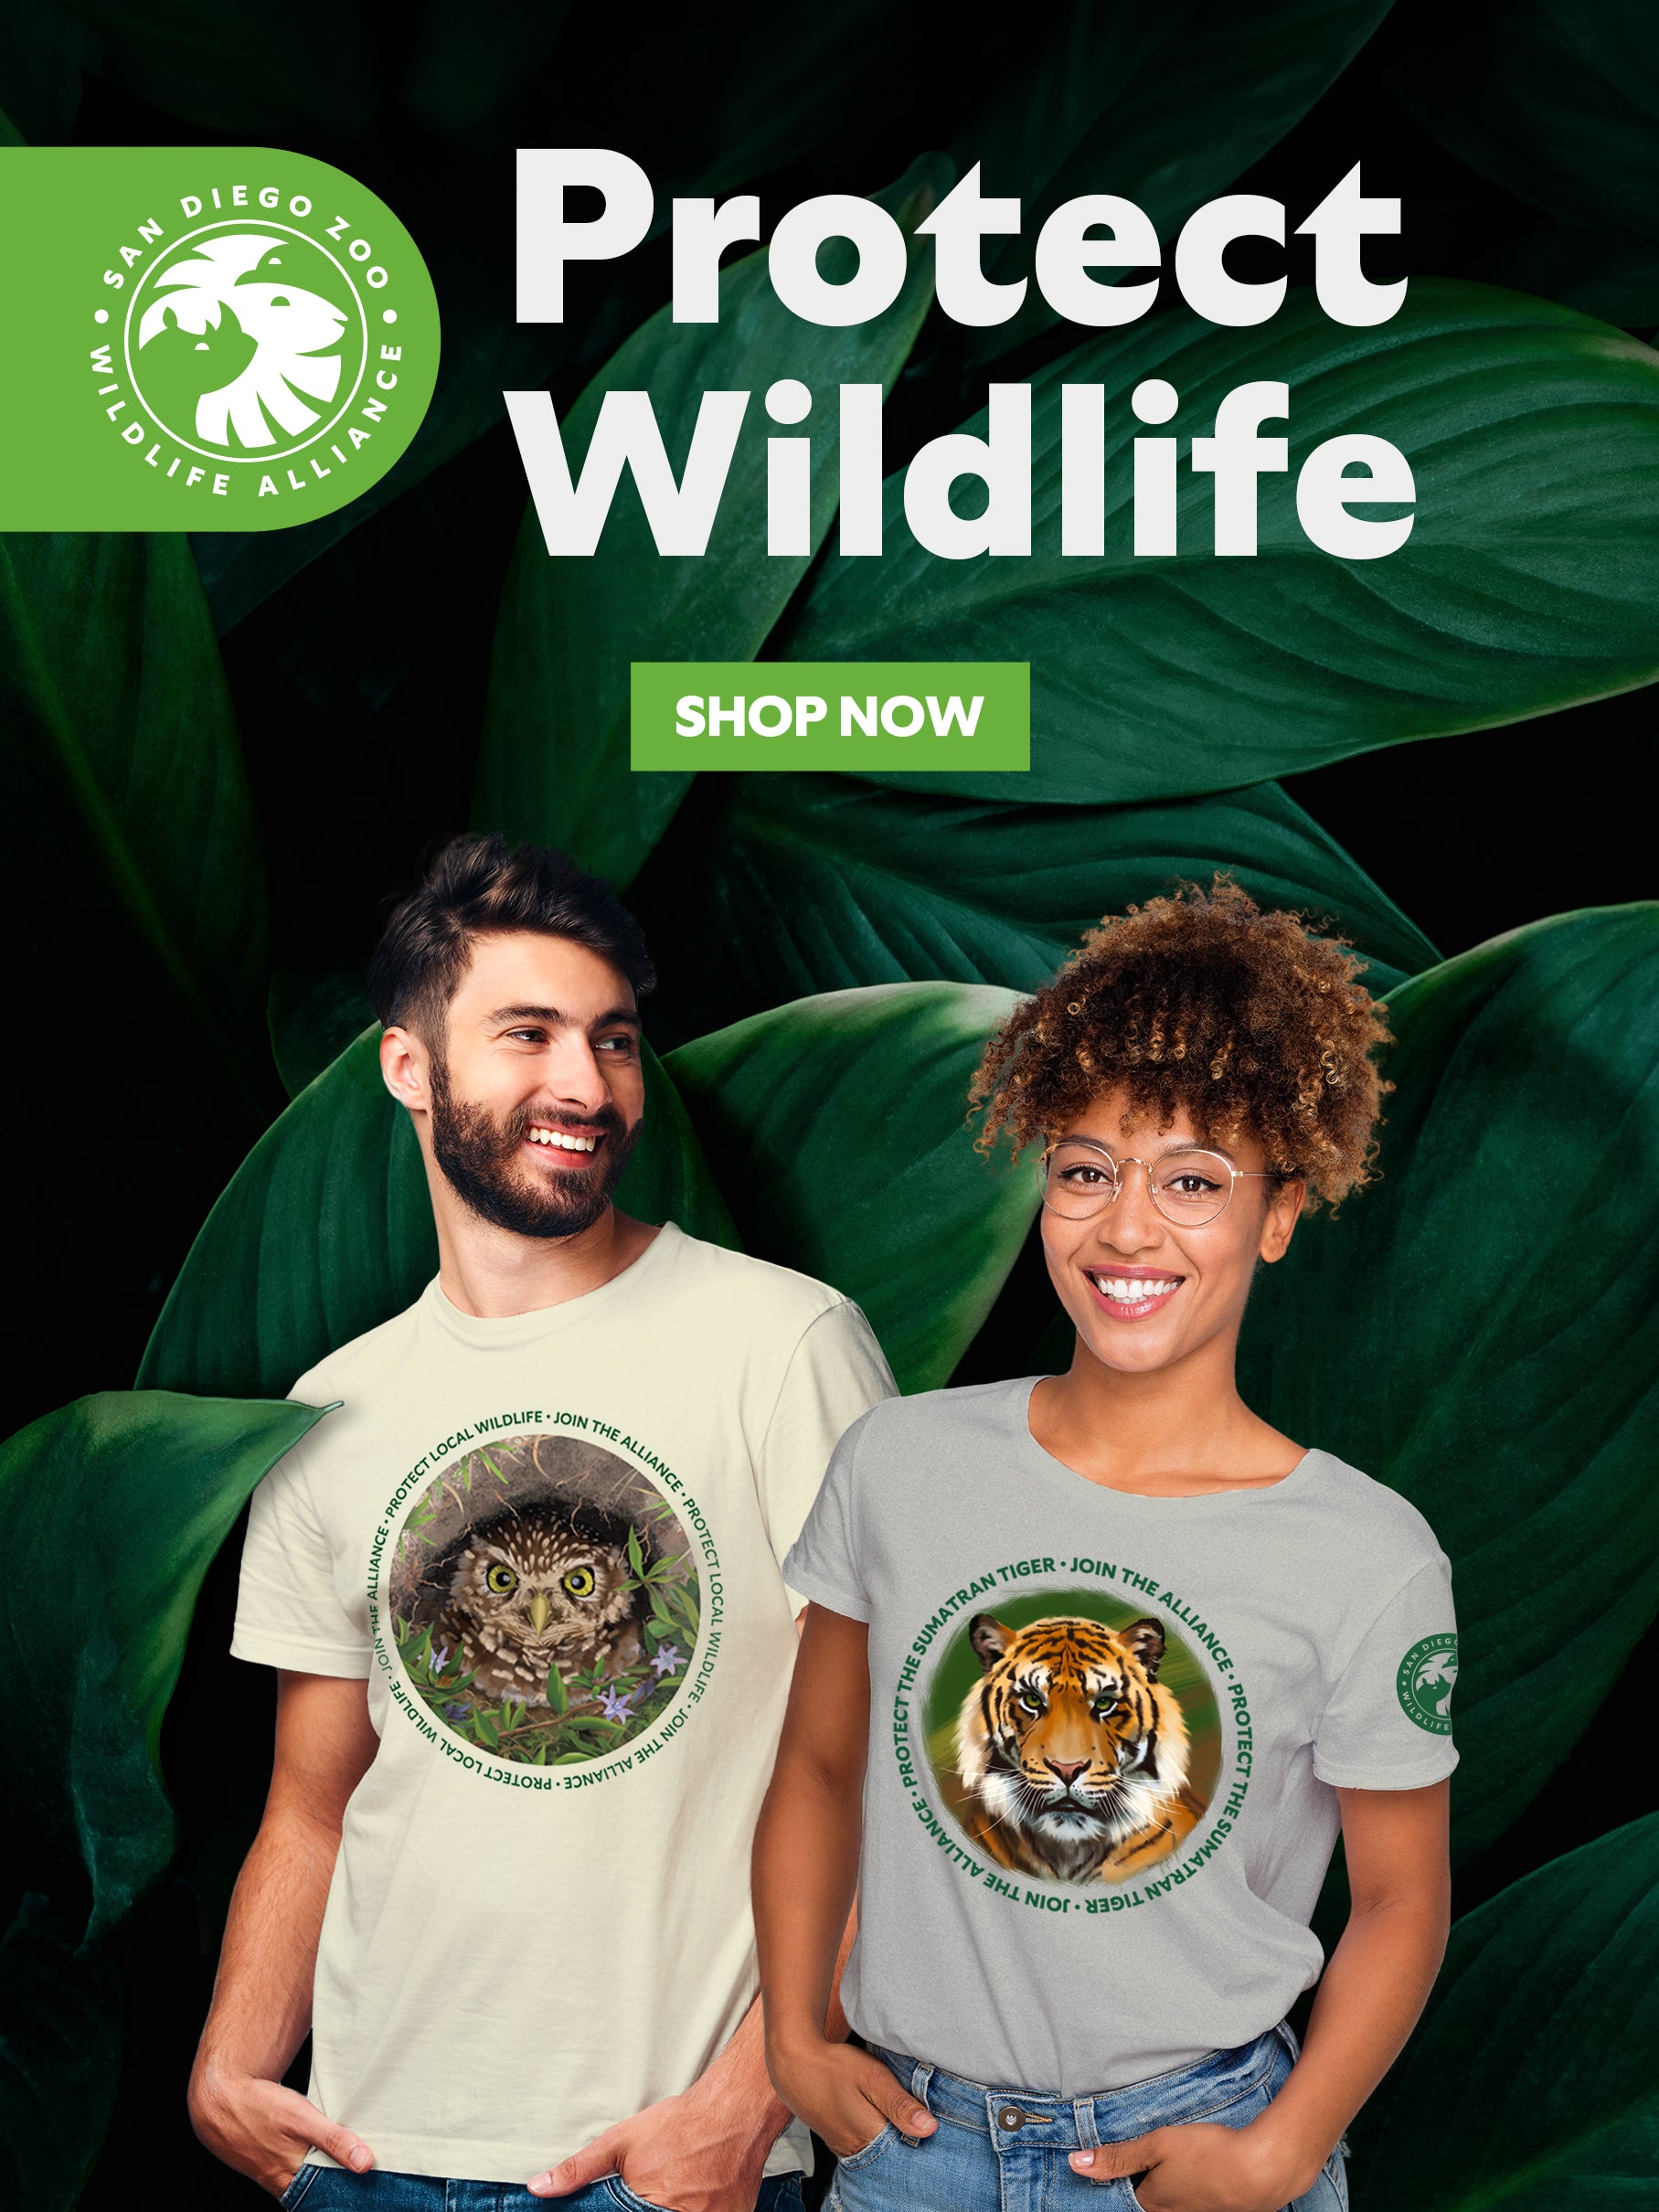 Protect Wildlife with our San Diego Zoo Wildlife Alliance collection